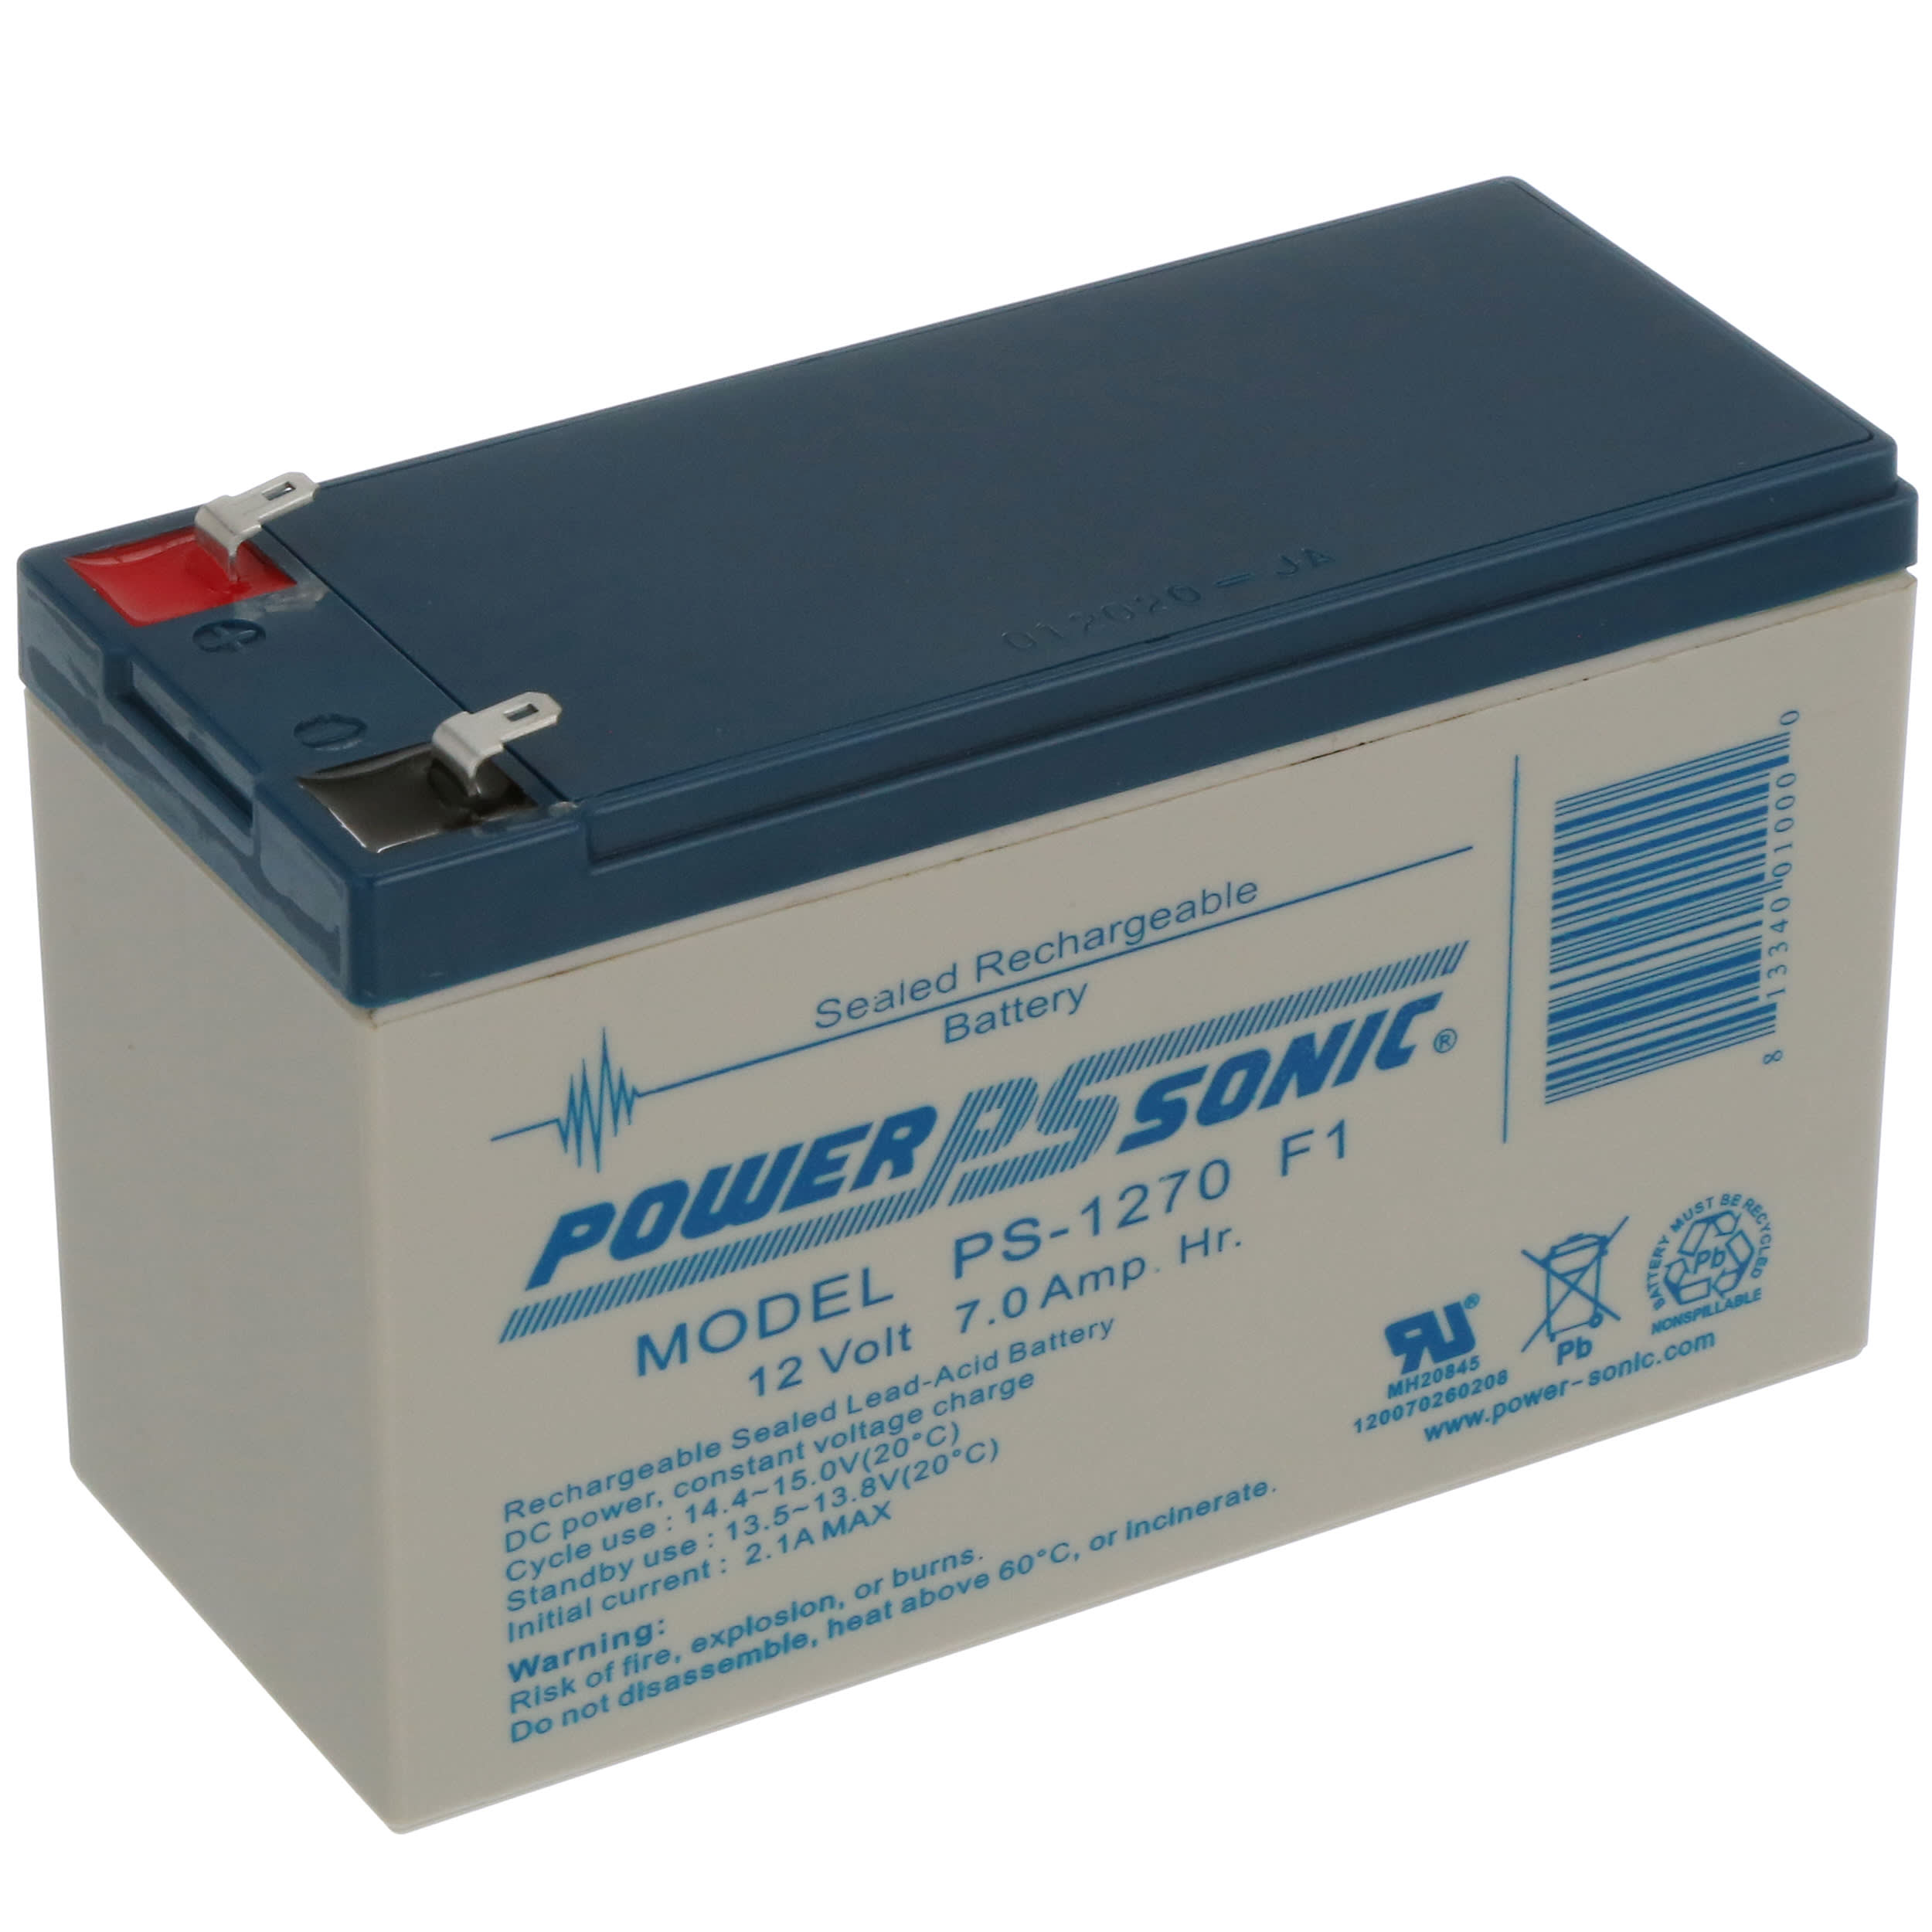 Powersonic PS1270F1 Replacement Rhino Battery 2 Pack 